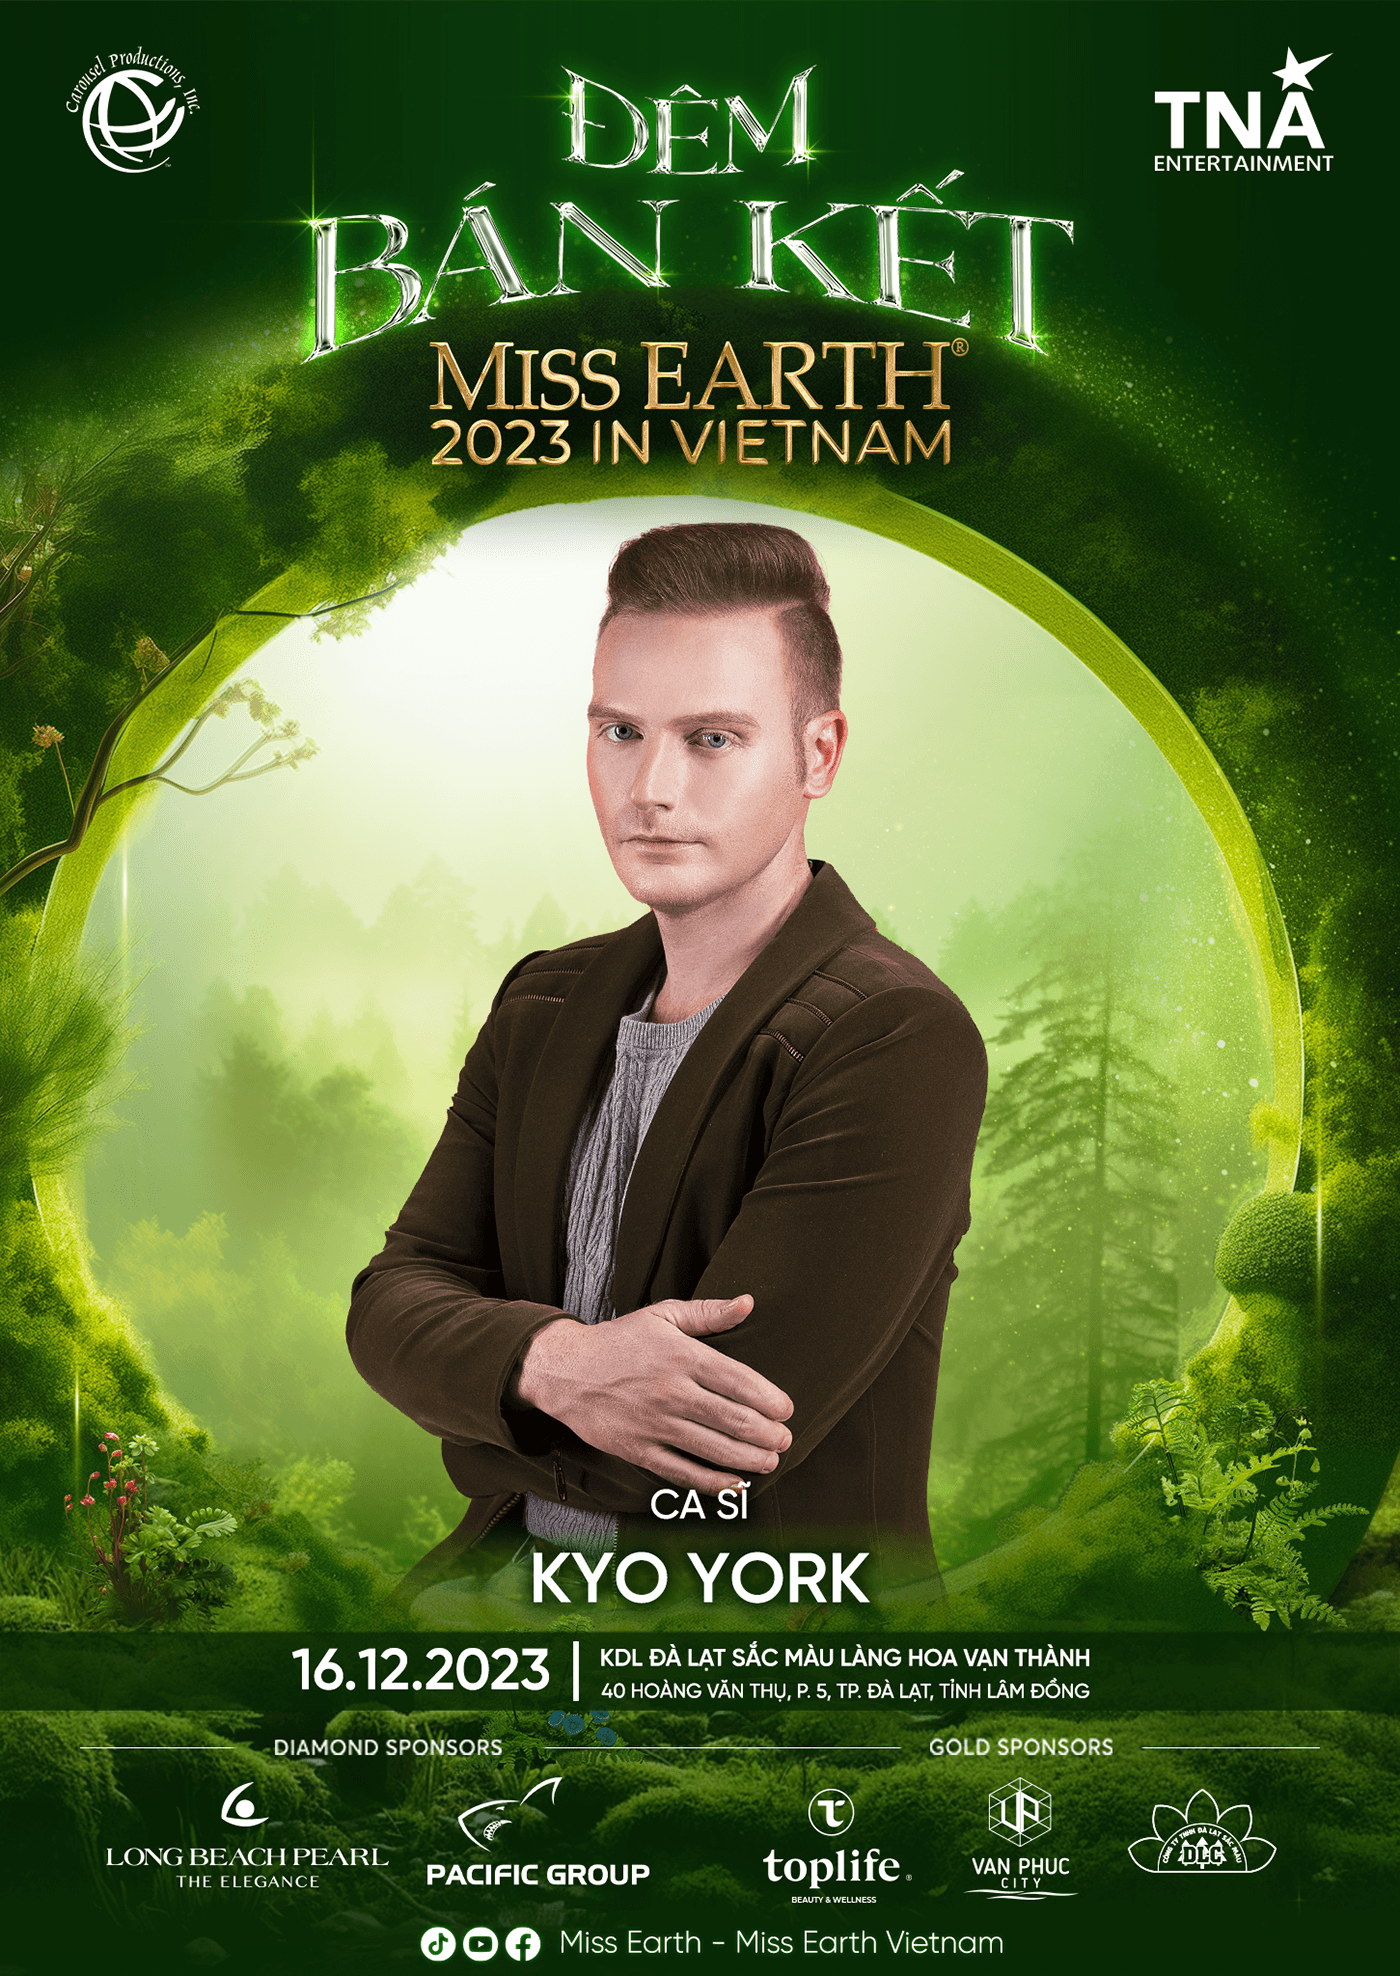 miss earth poster hoa hậu poster beauty pageant beauty queen